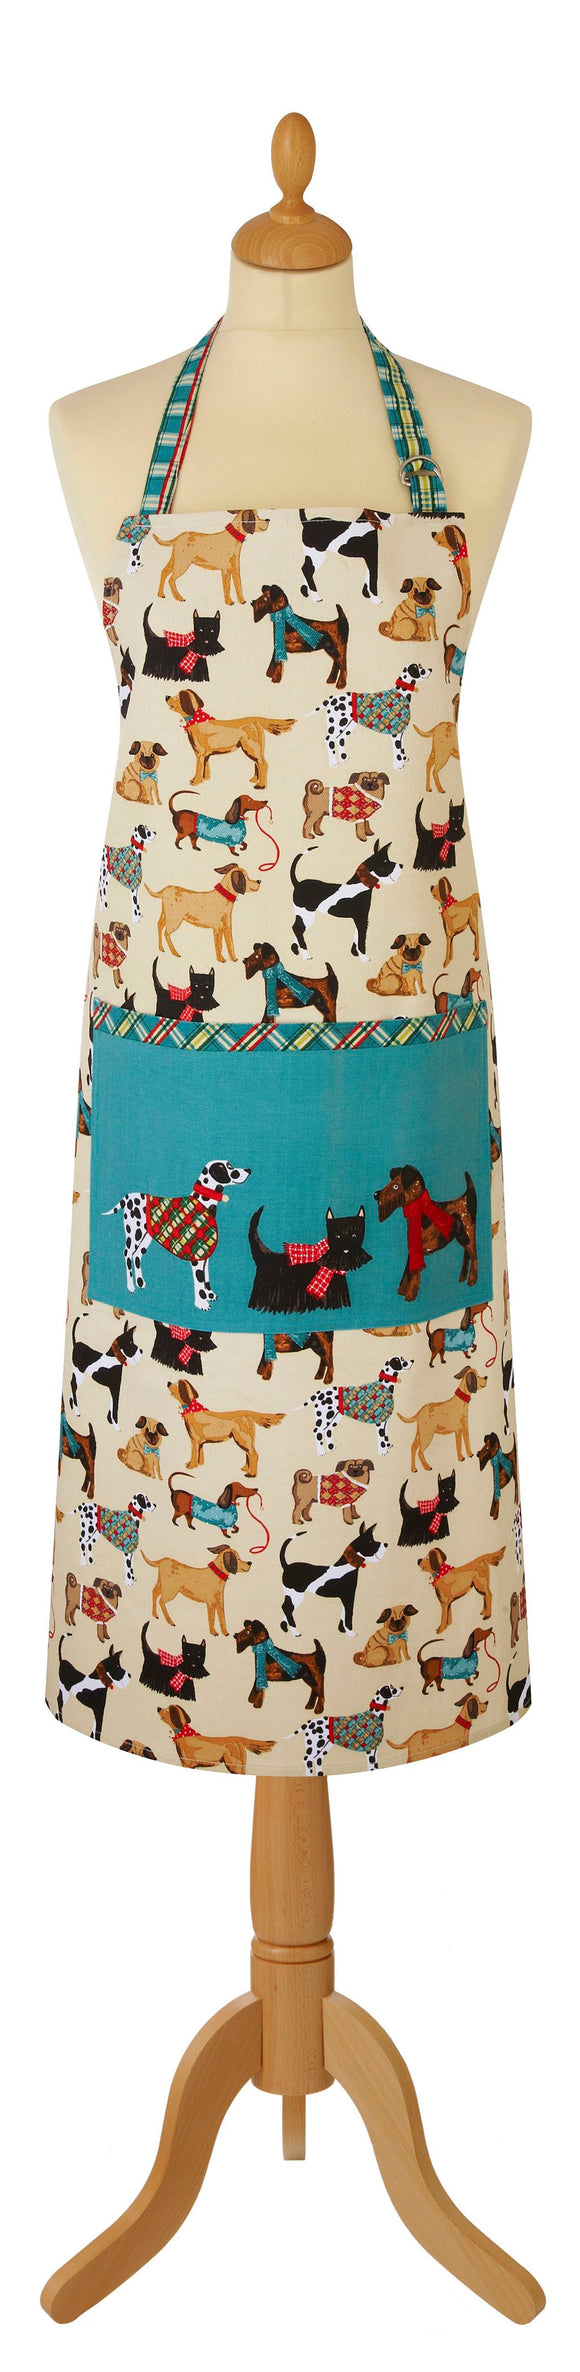 Cotton Apron Hound Dog by Ulster Weavers - Gifteasy Online